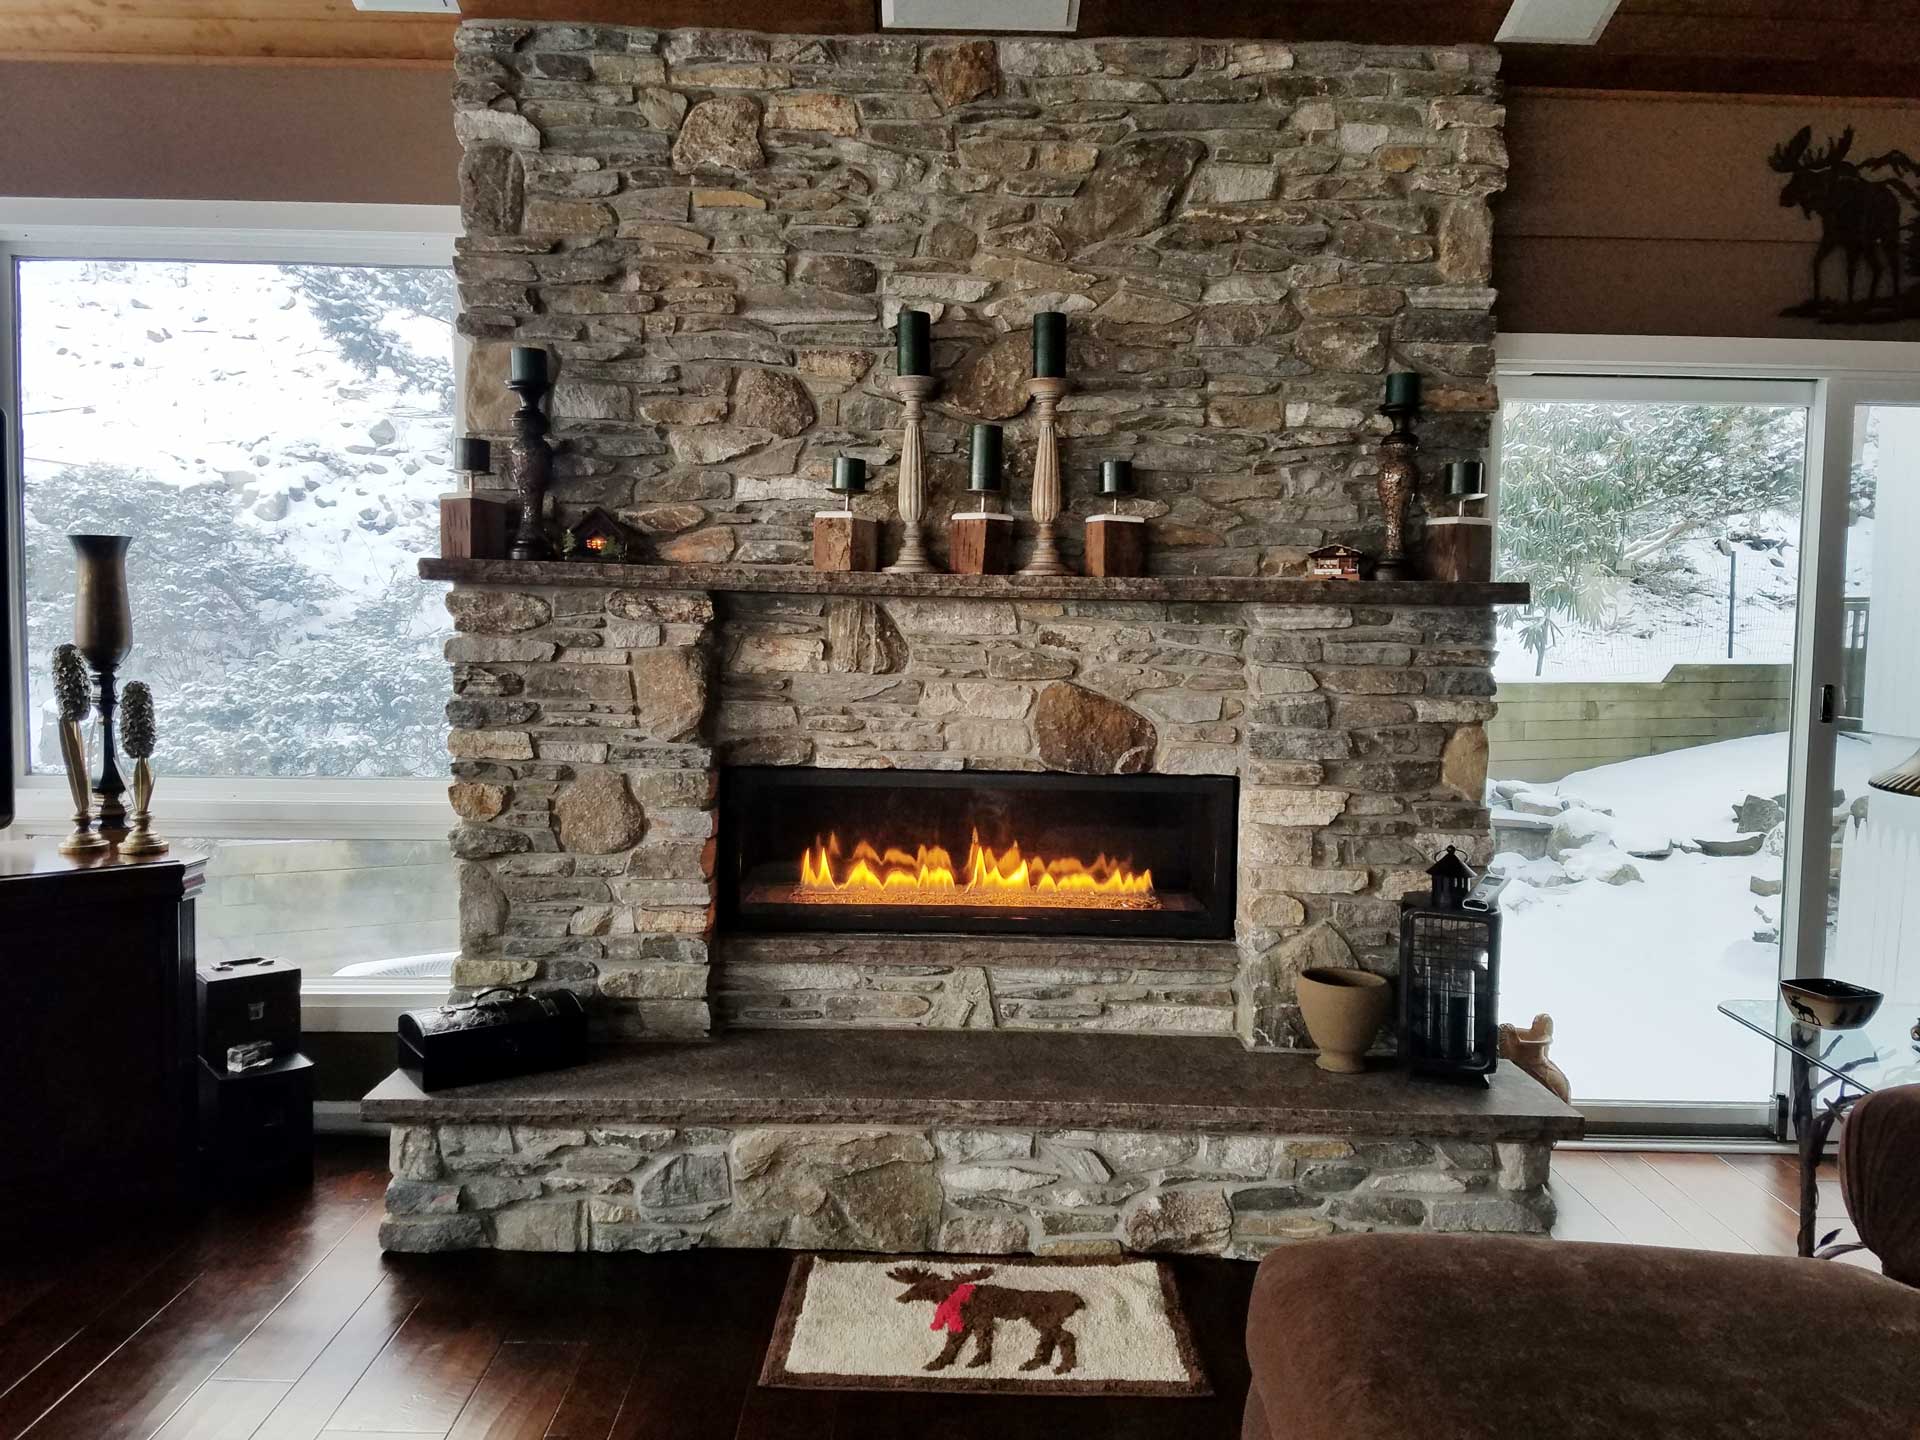 Air Stone Fireplace Ideas – Fireplace Guide by Linda